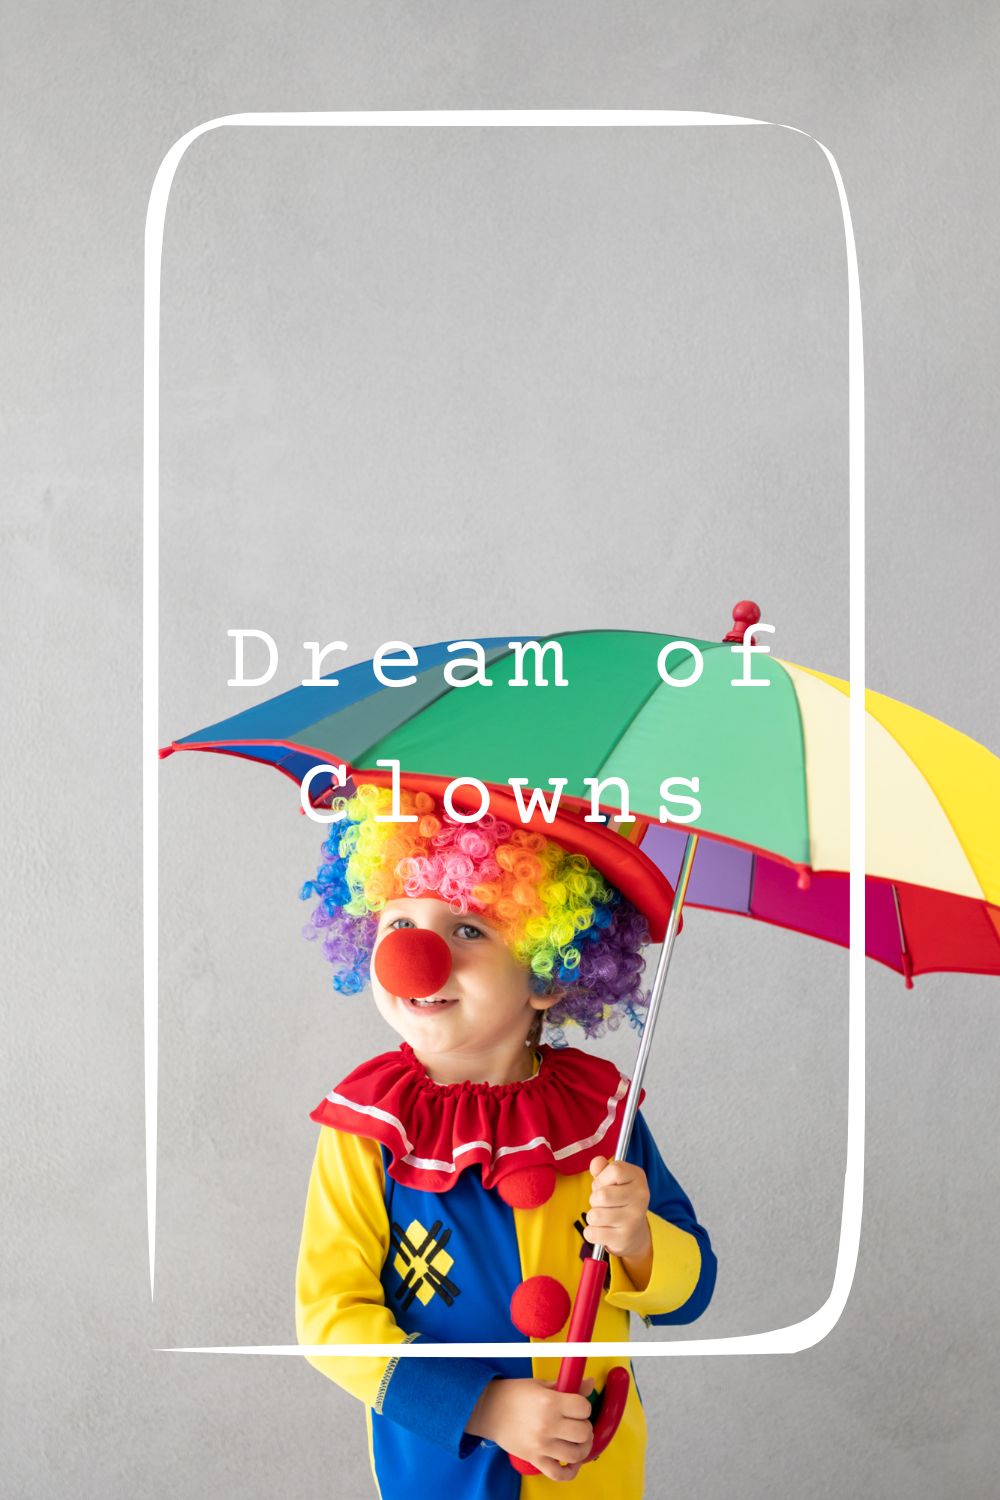 10 Dream of Clowns Meanings4